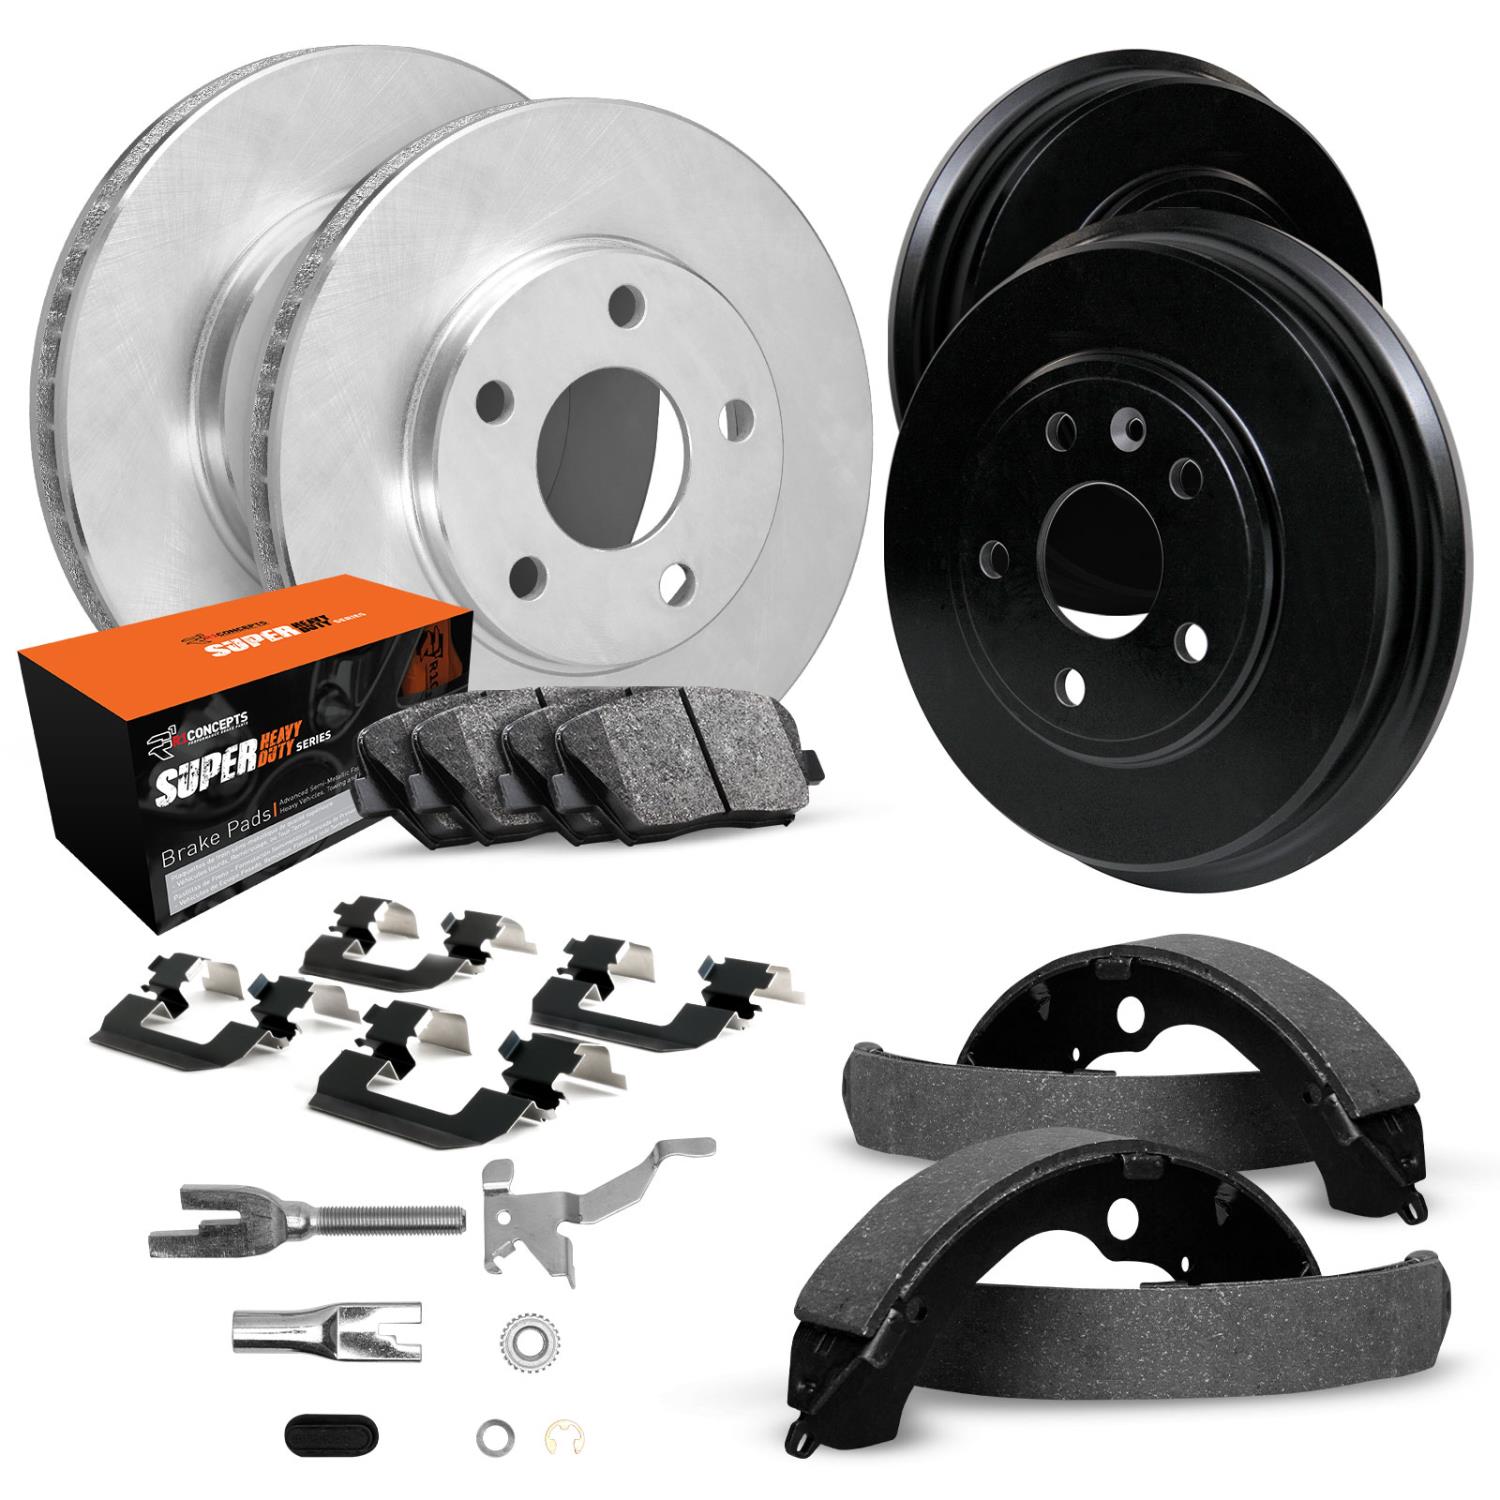 E-Line Blank Brake Rotor & Drum Set w/Super-Duty Pads, Shoes, Hardware, & Adjusters, 1994-1995 Ford/Lincoln/Mercury/Mazda